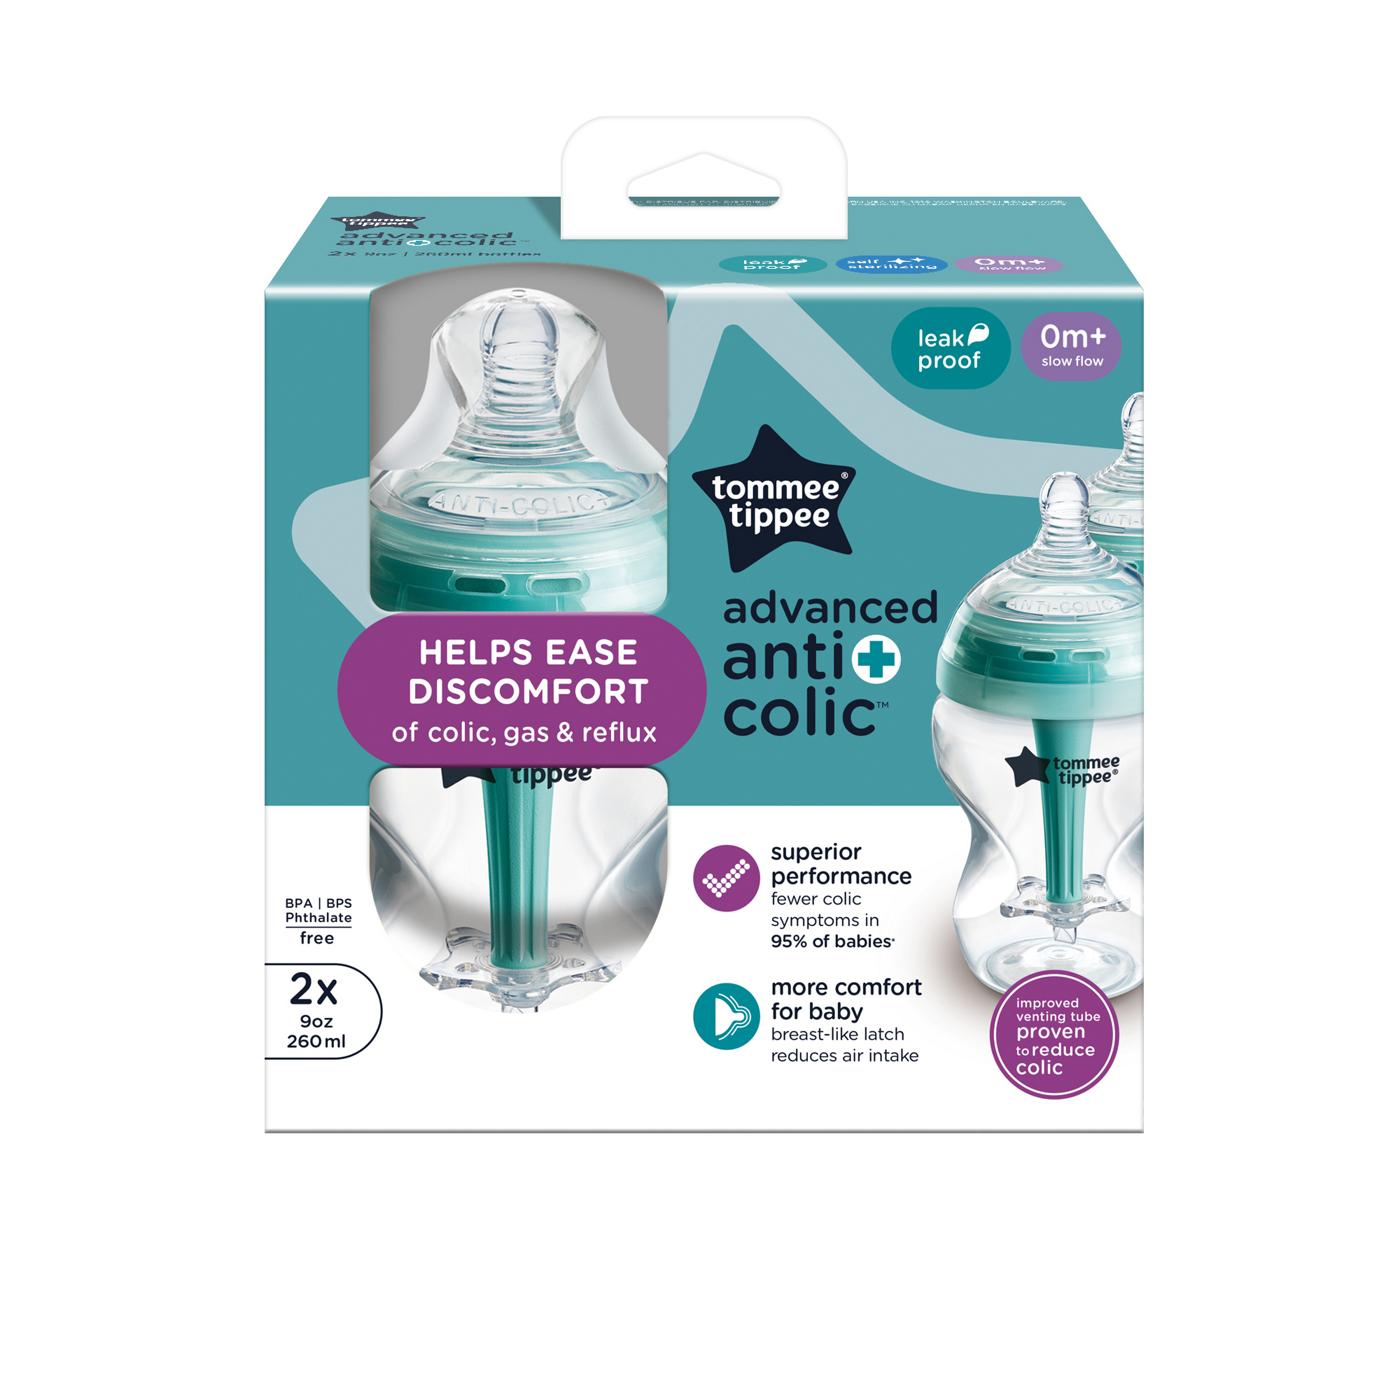 Tommee Tippee Advanced Anti-Colic Bottles; image 1 of 3